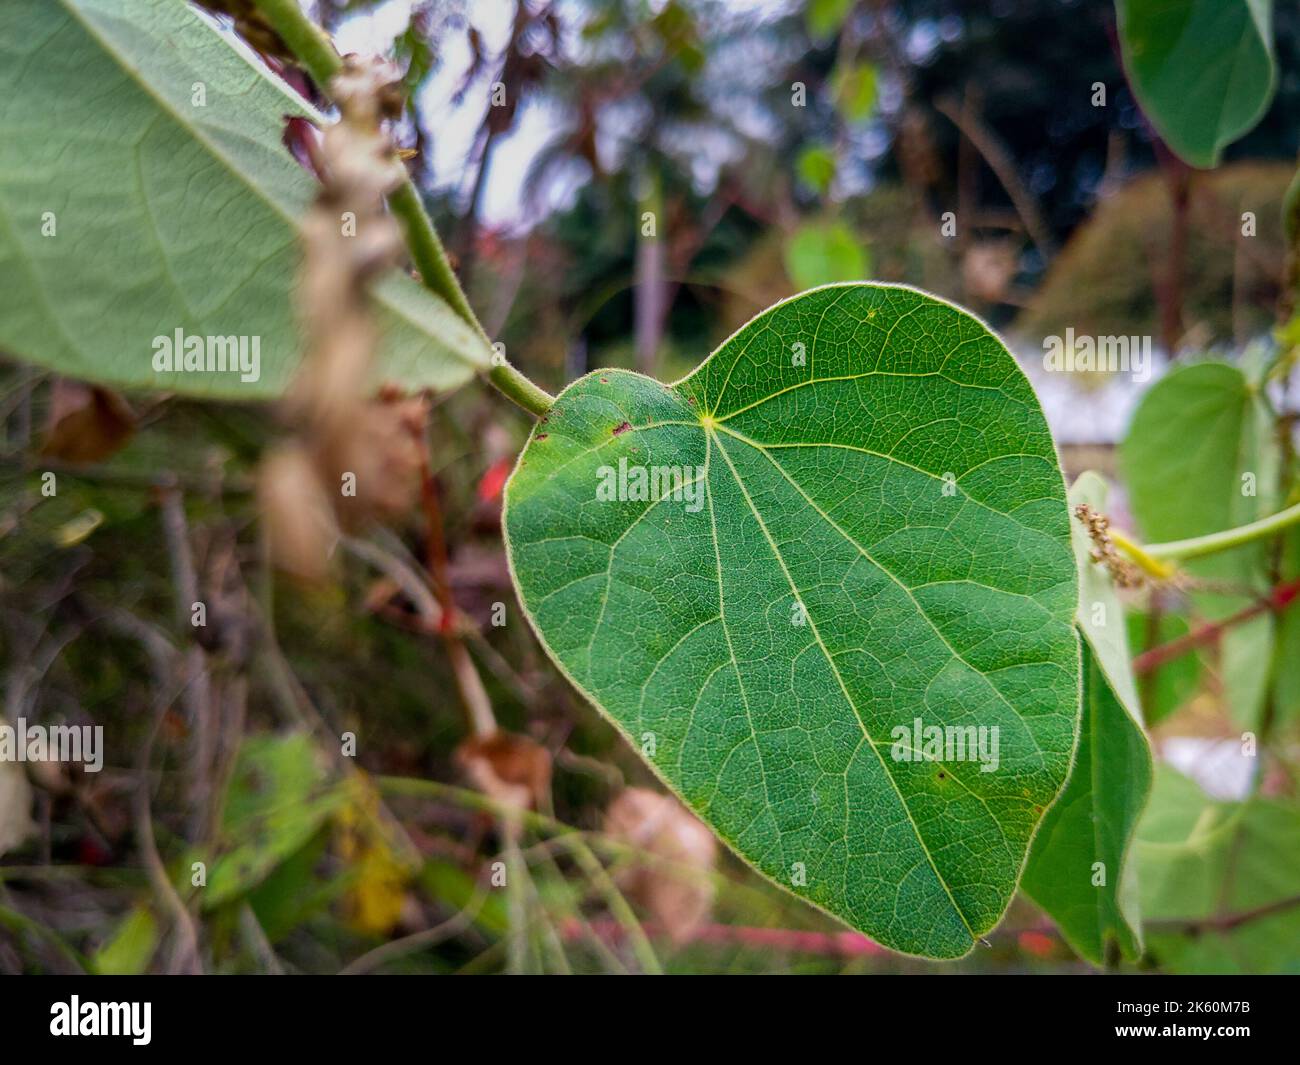 A close up shot of a green leaf with visible vein system. Veins are composed of xylem and phloem cells. uttarakhand India. Stock Photo